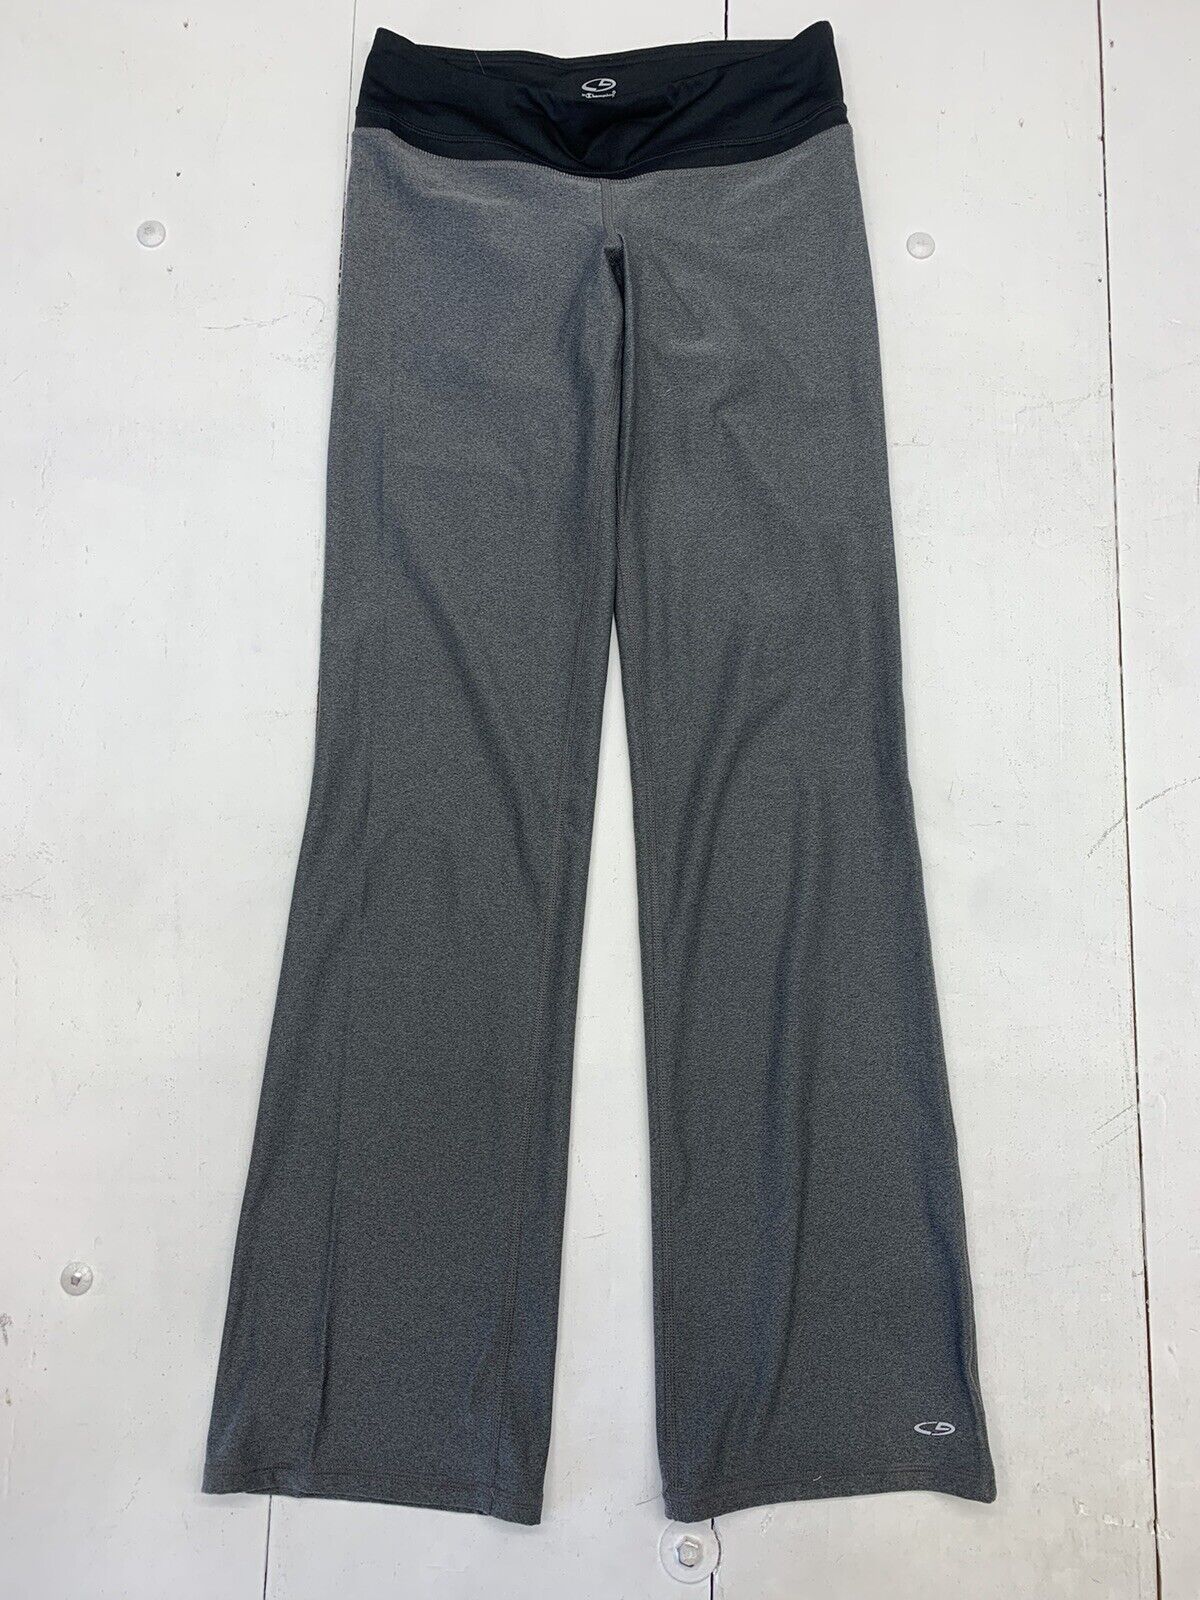 C9 by Champion Women's Activewear Mid-Rise Leggings, Echo Gray, Size XS,  NWT 